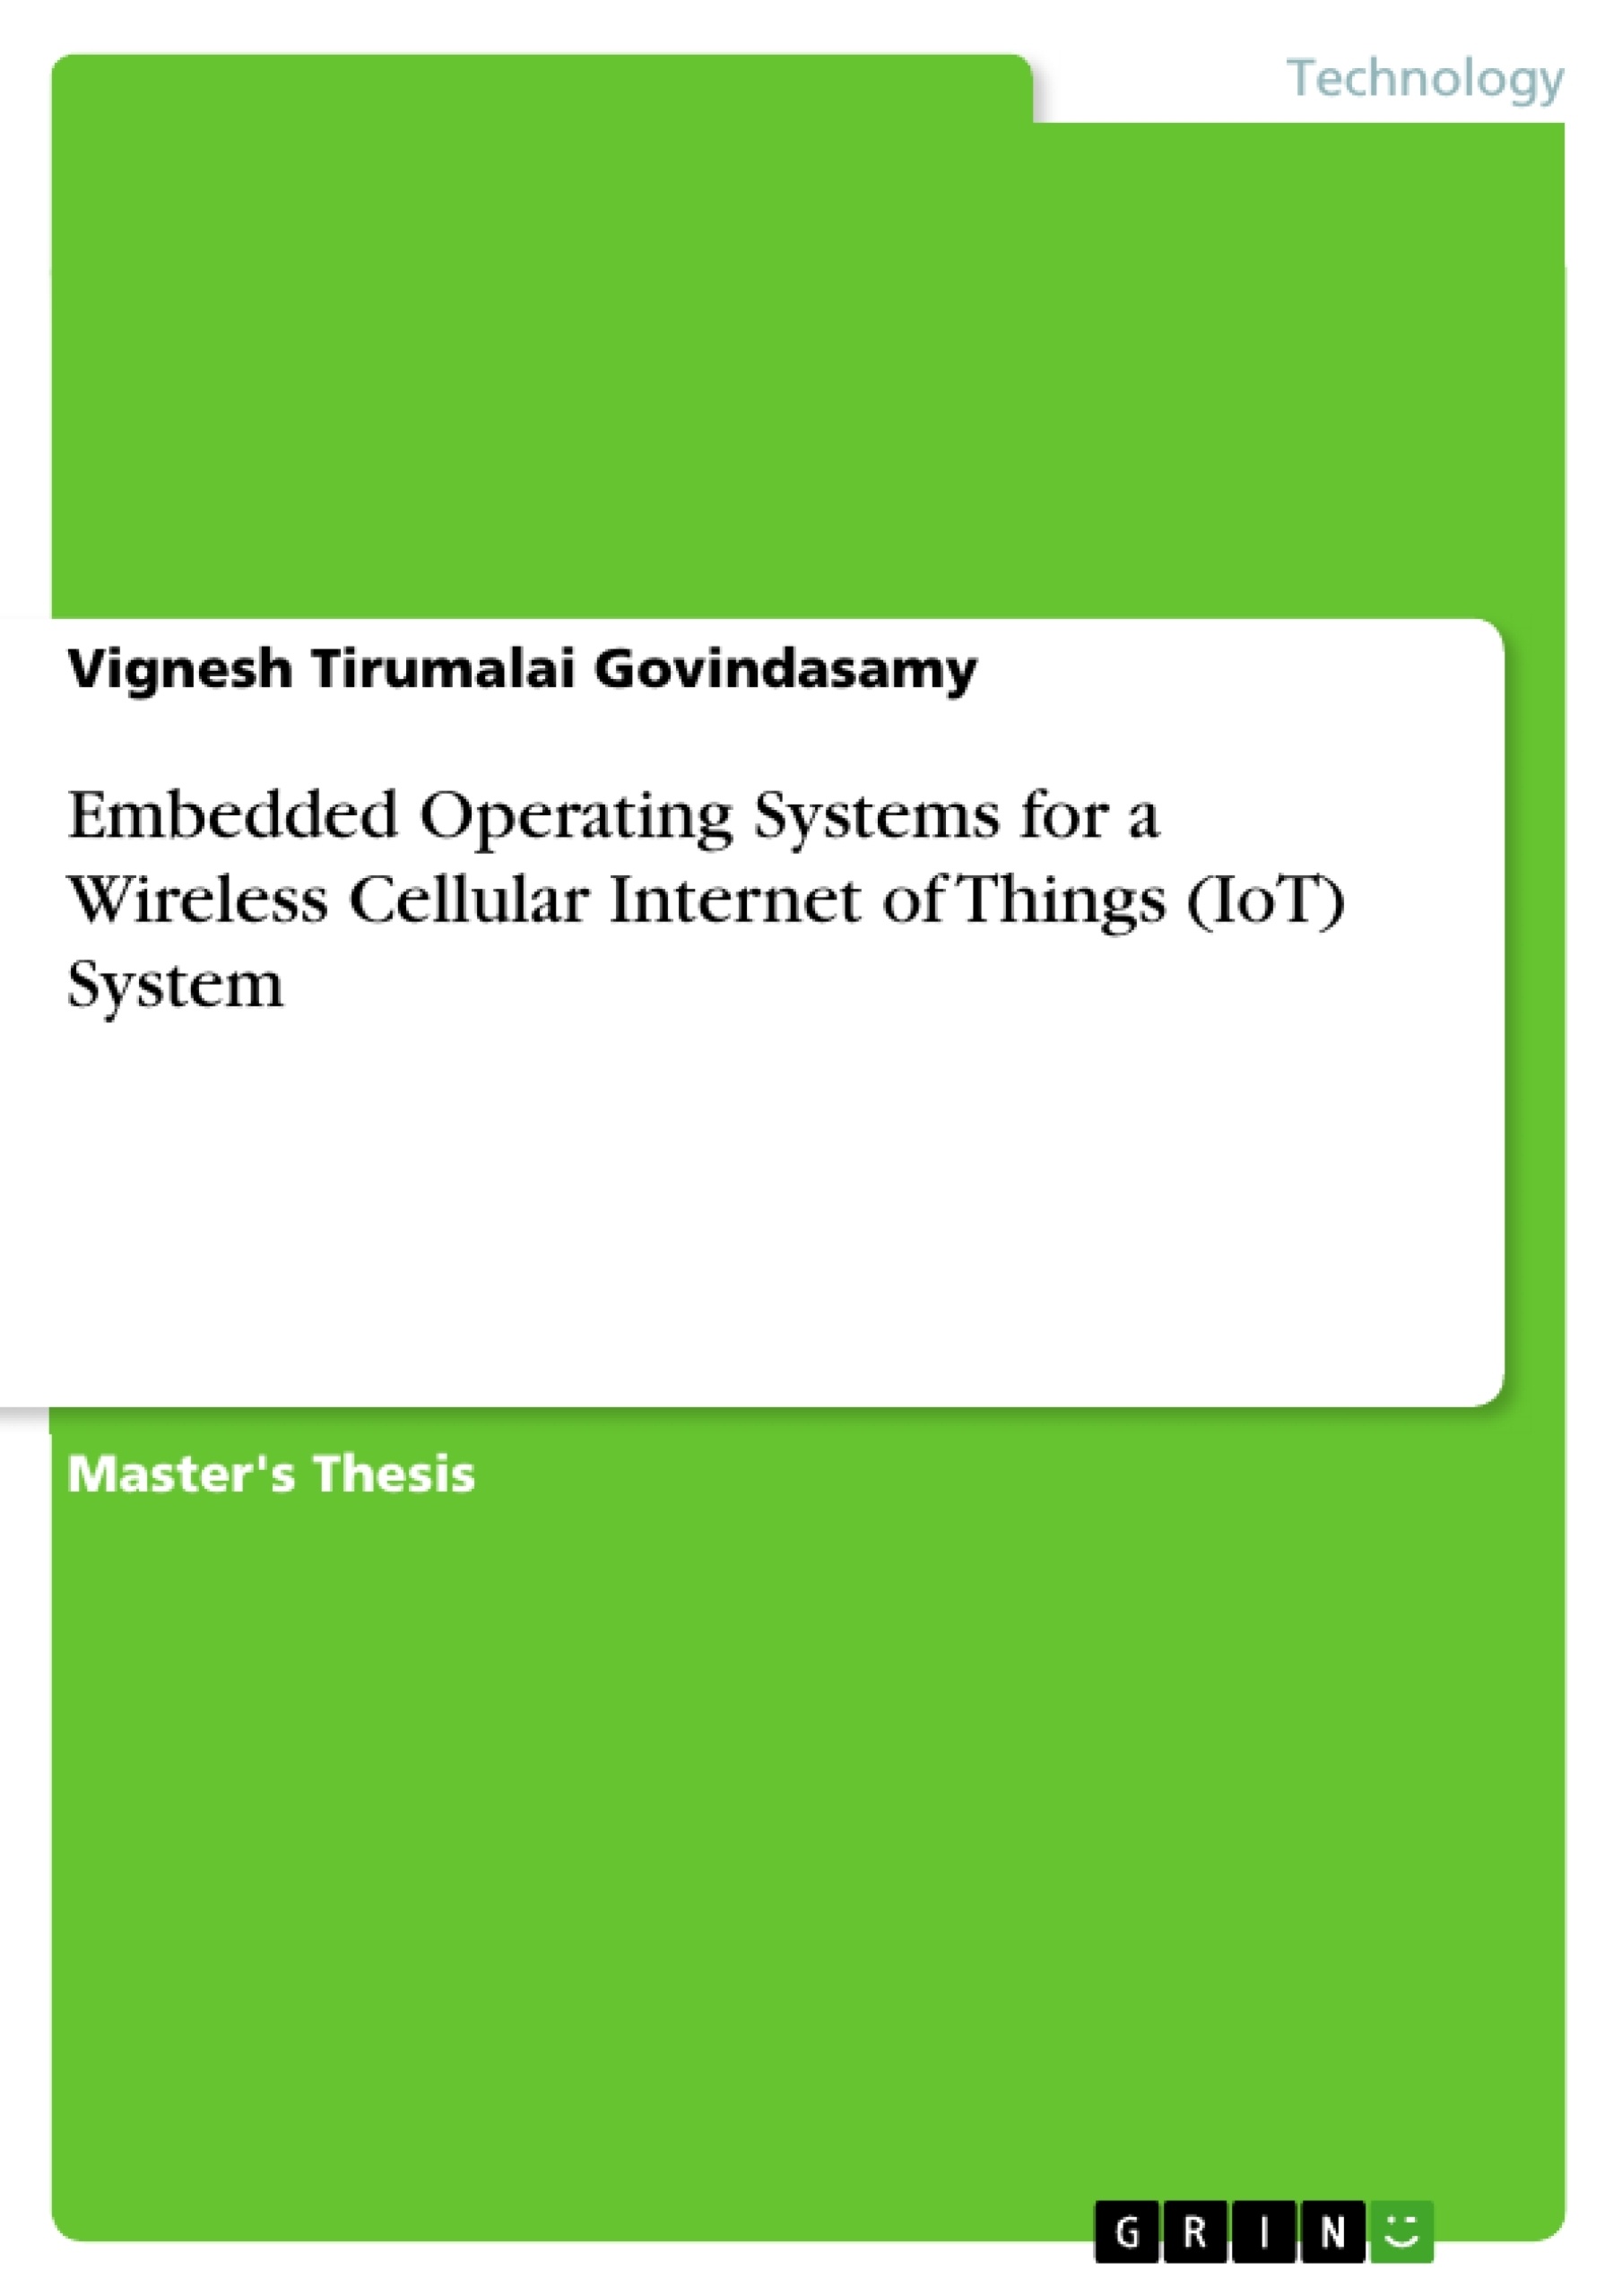 Title: Embedded Operating Systems for a Wireless Cellular Internet of Things (IoT) System